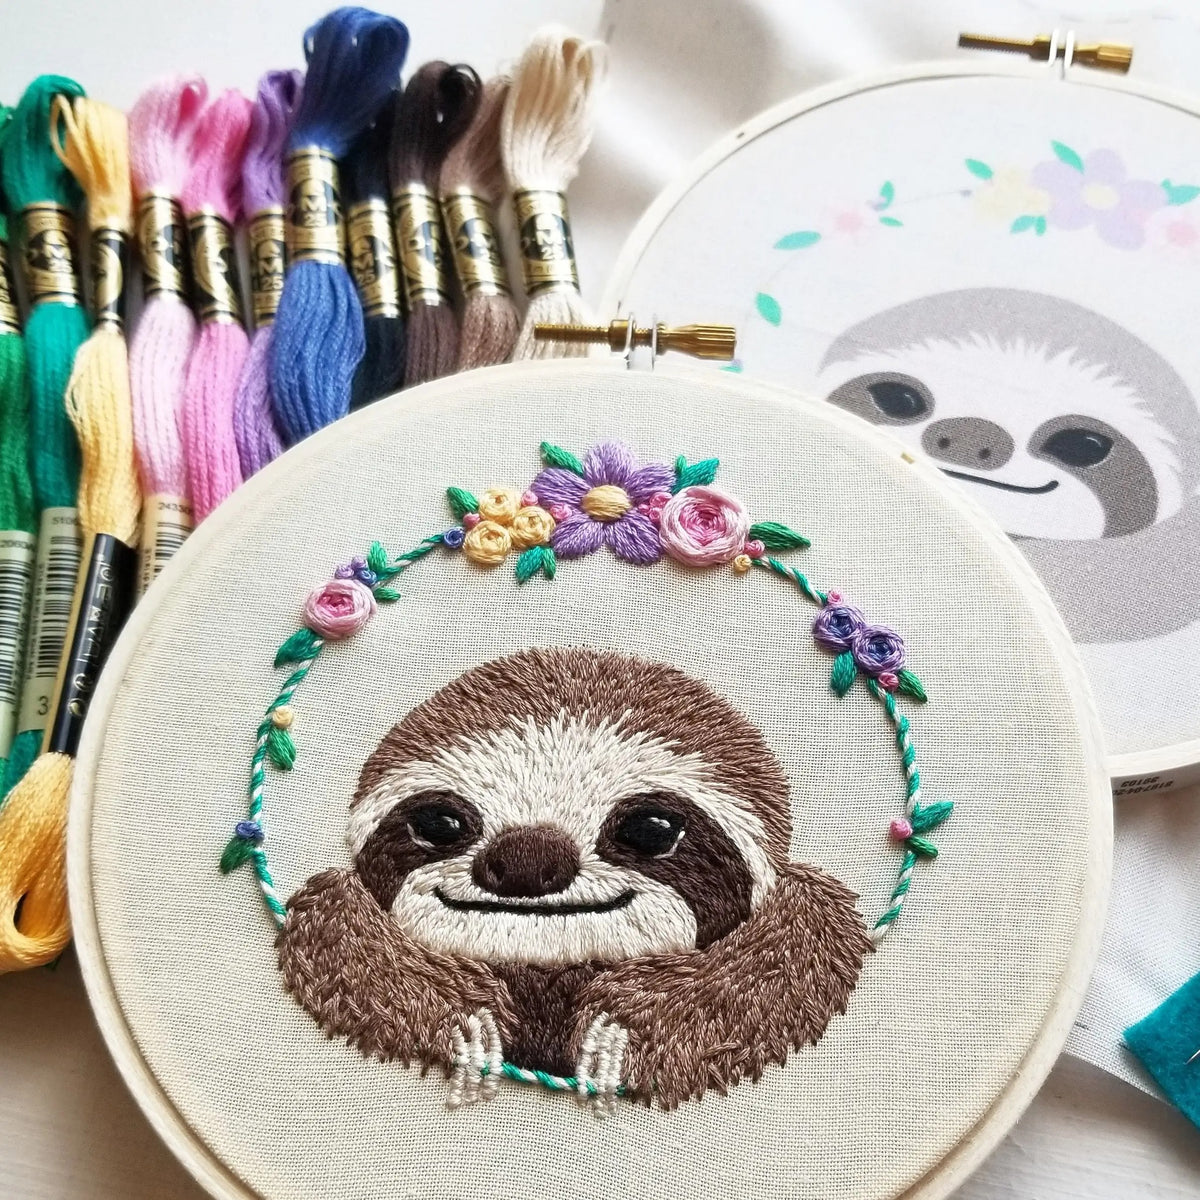 Smiling Sloth Hand Embroidery Kit